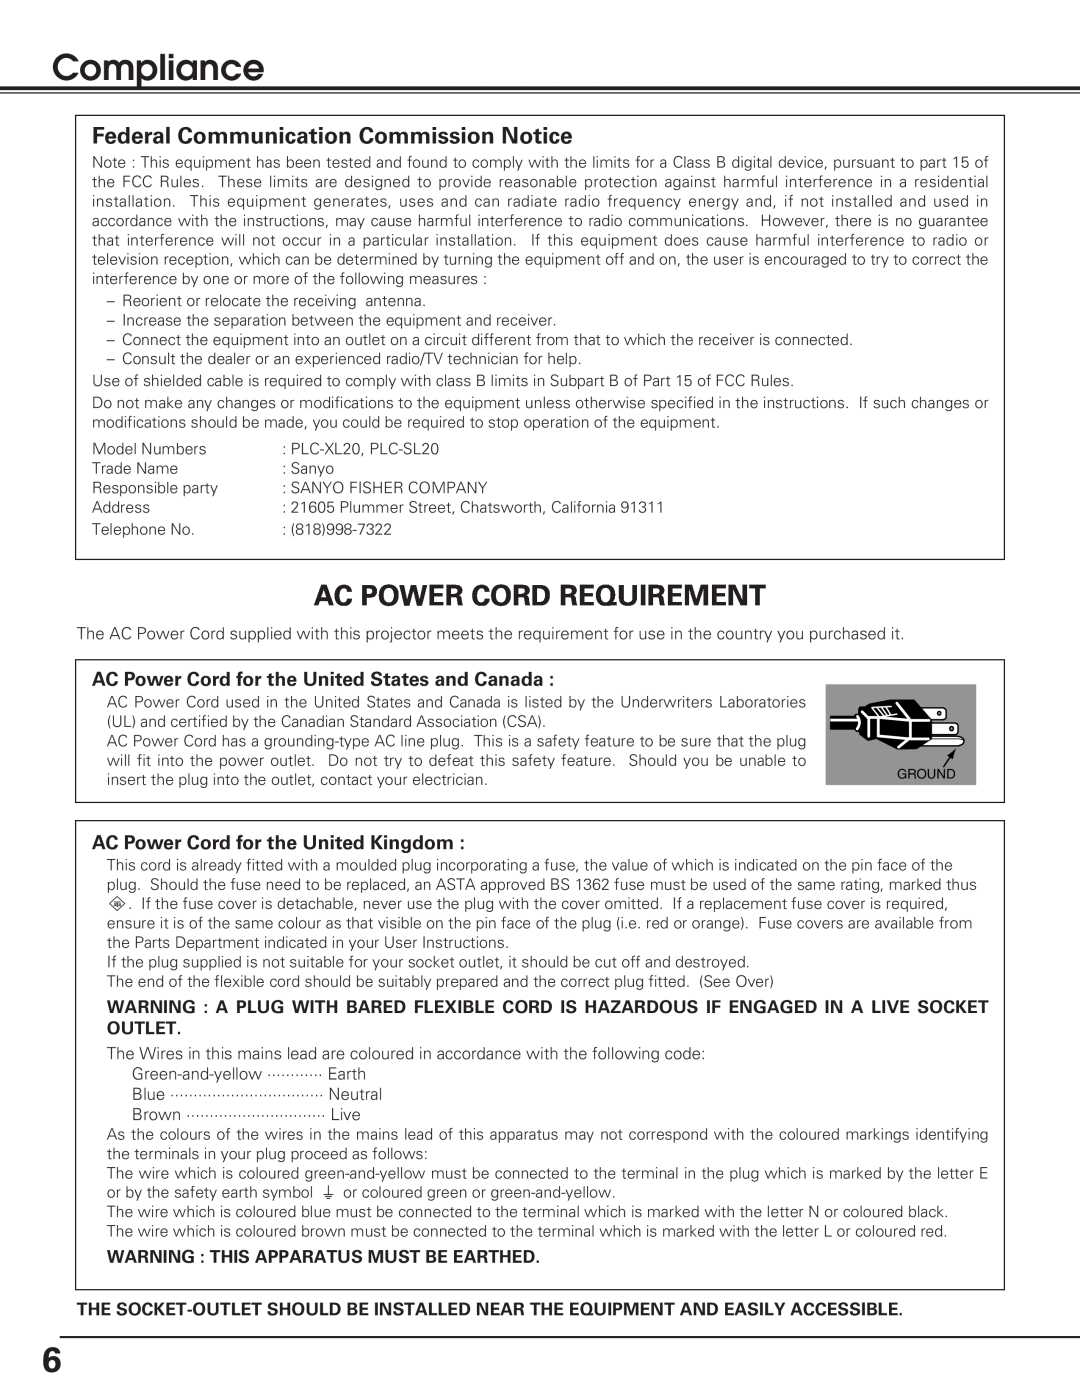 Sanyo PLC-SL20 owner manual Compliance, Ac Power Cord Requirement, Federal Communication Commission Notice 